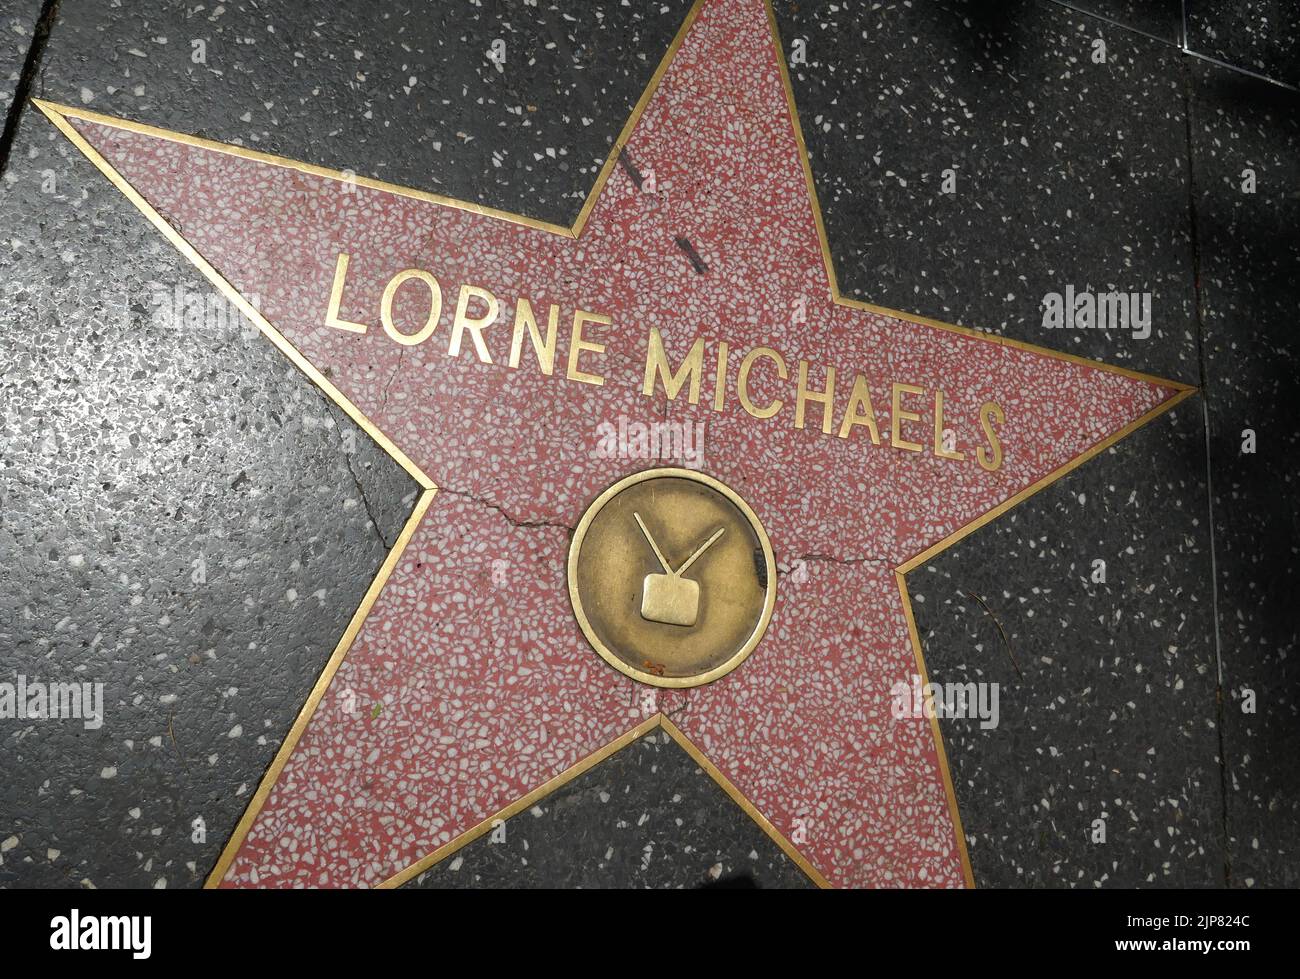 Los Angeles, California, USA 15th August 2022 Lorne Michaels Hollywood Walk of Fame Star on Hollywood Walk of Fame on August 15, 2022 in Los Angeles, California, USA. Photo by Barry King/Alamy Stock Photo Stock Photo